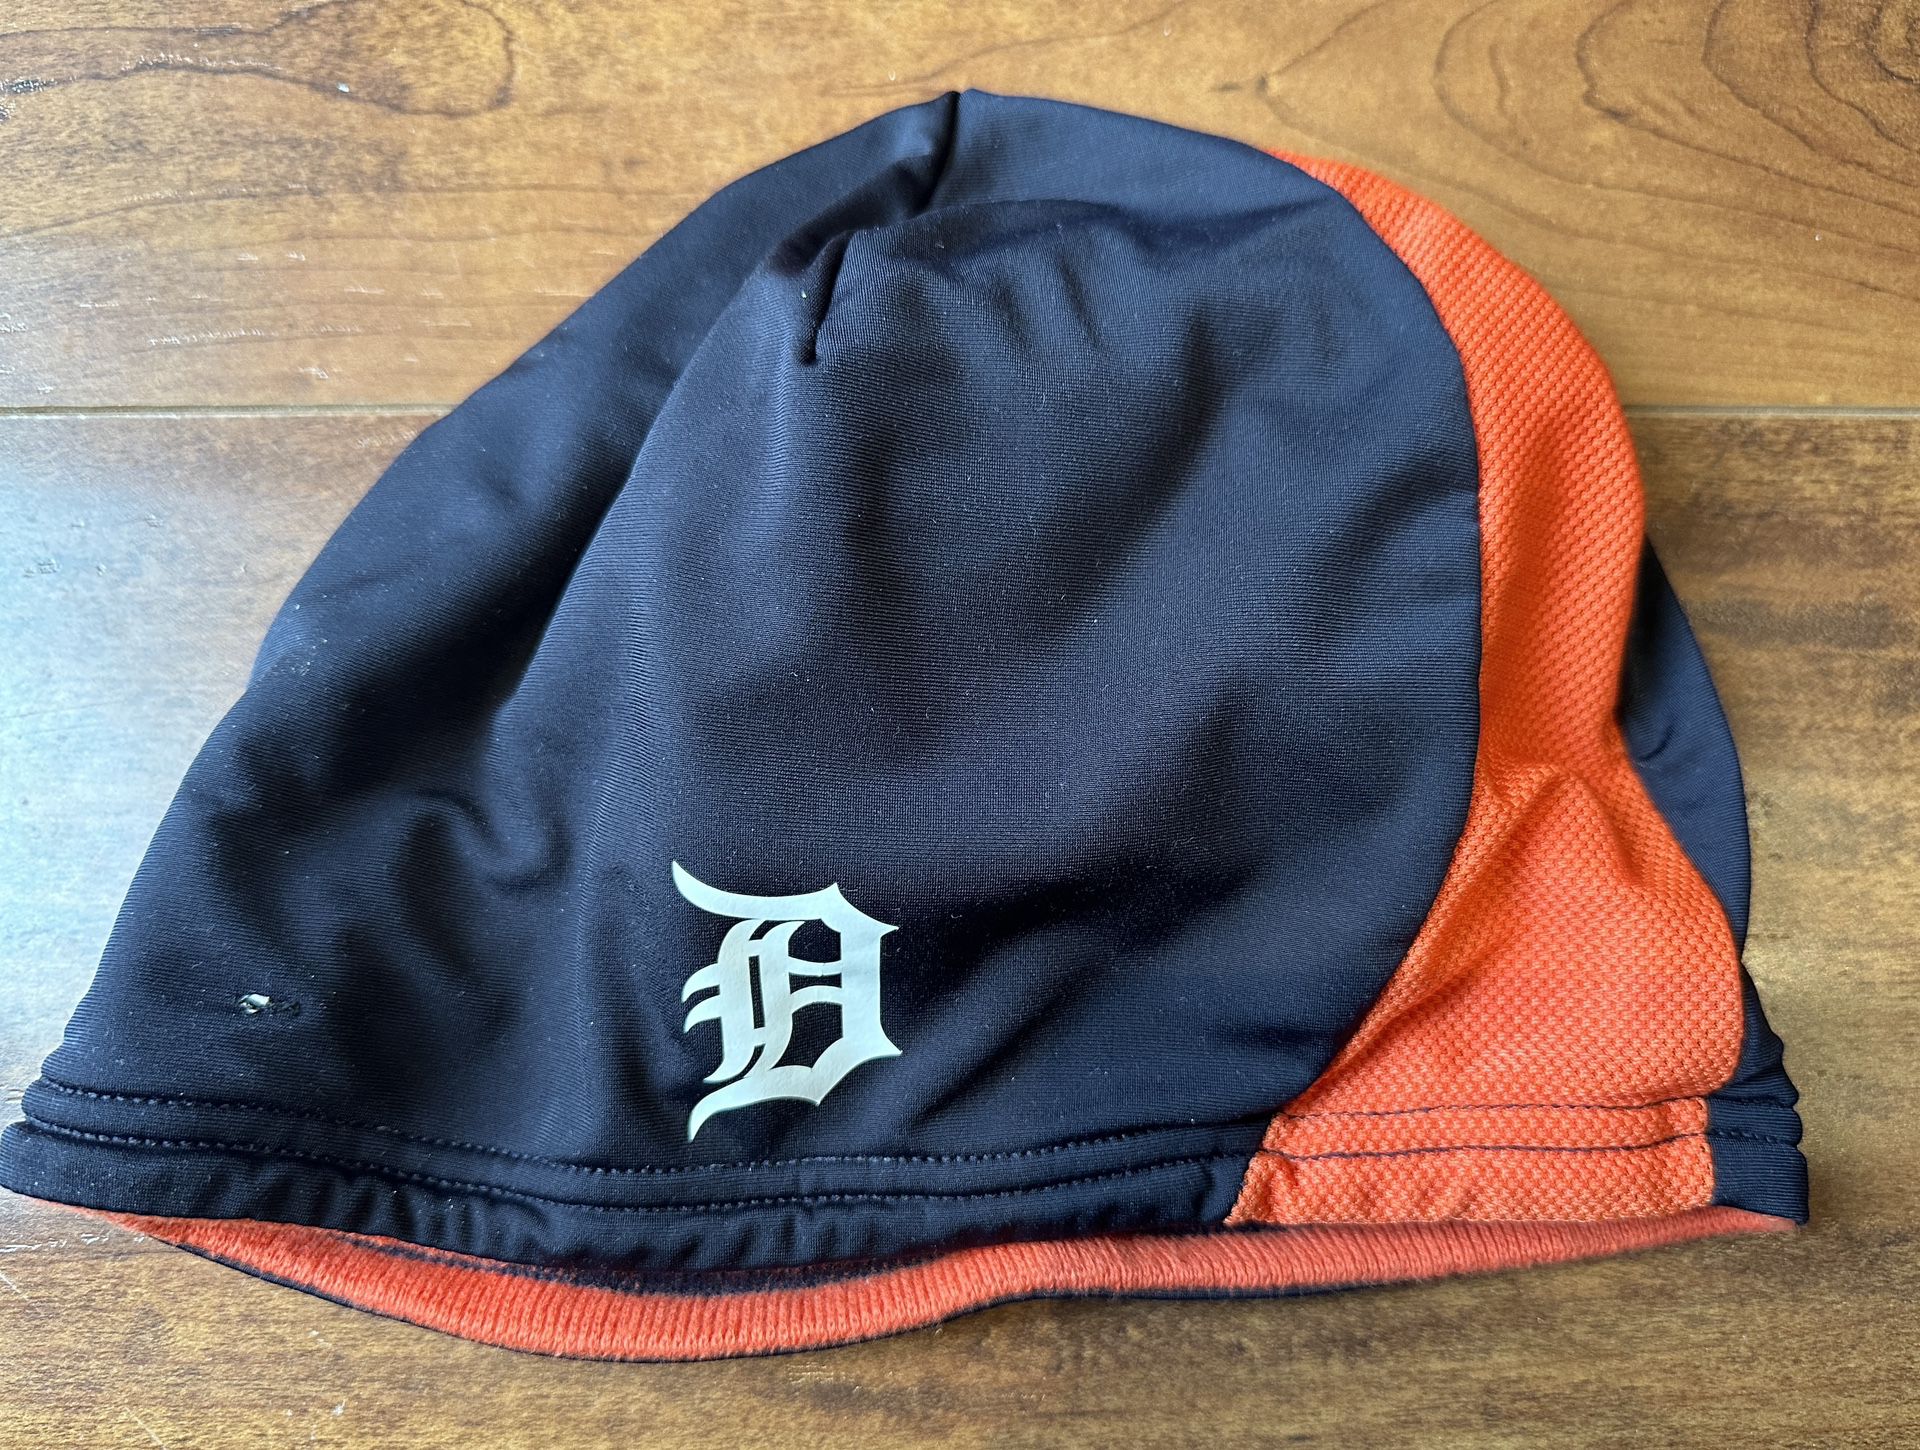 Detroit Tigers authentic skull/beanie cap for Sale in Troy, MI - OfferUp